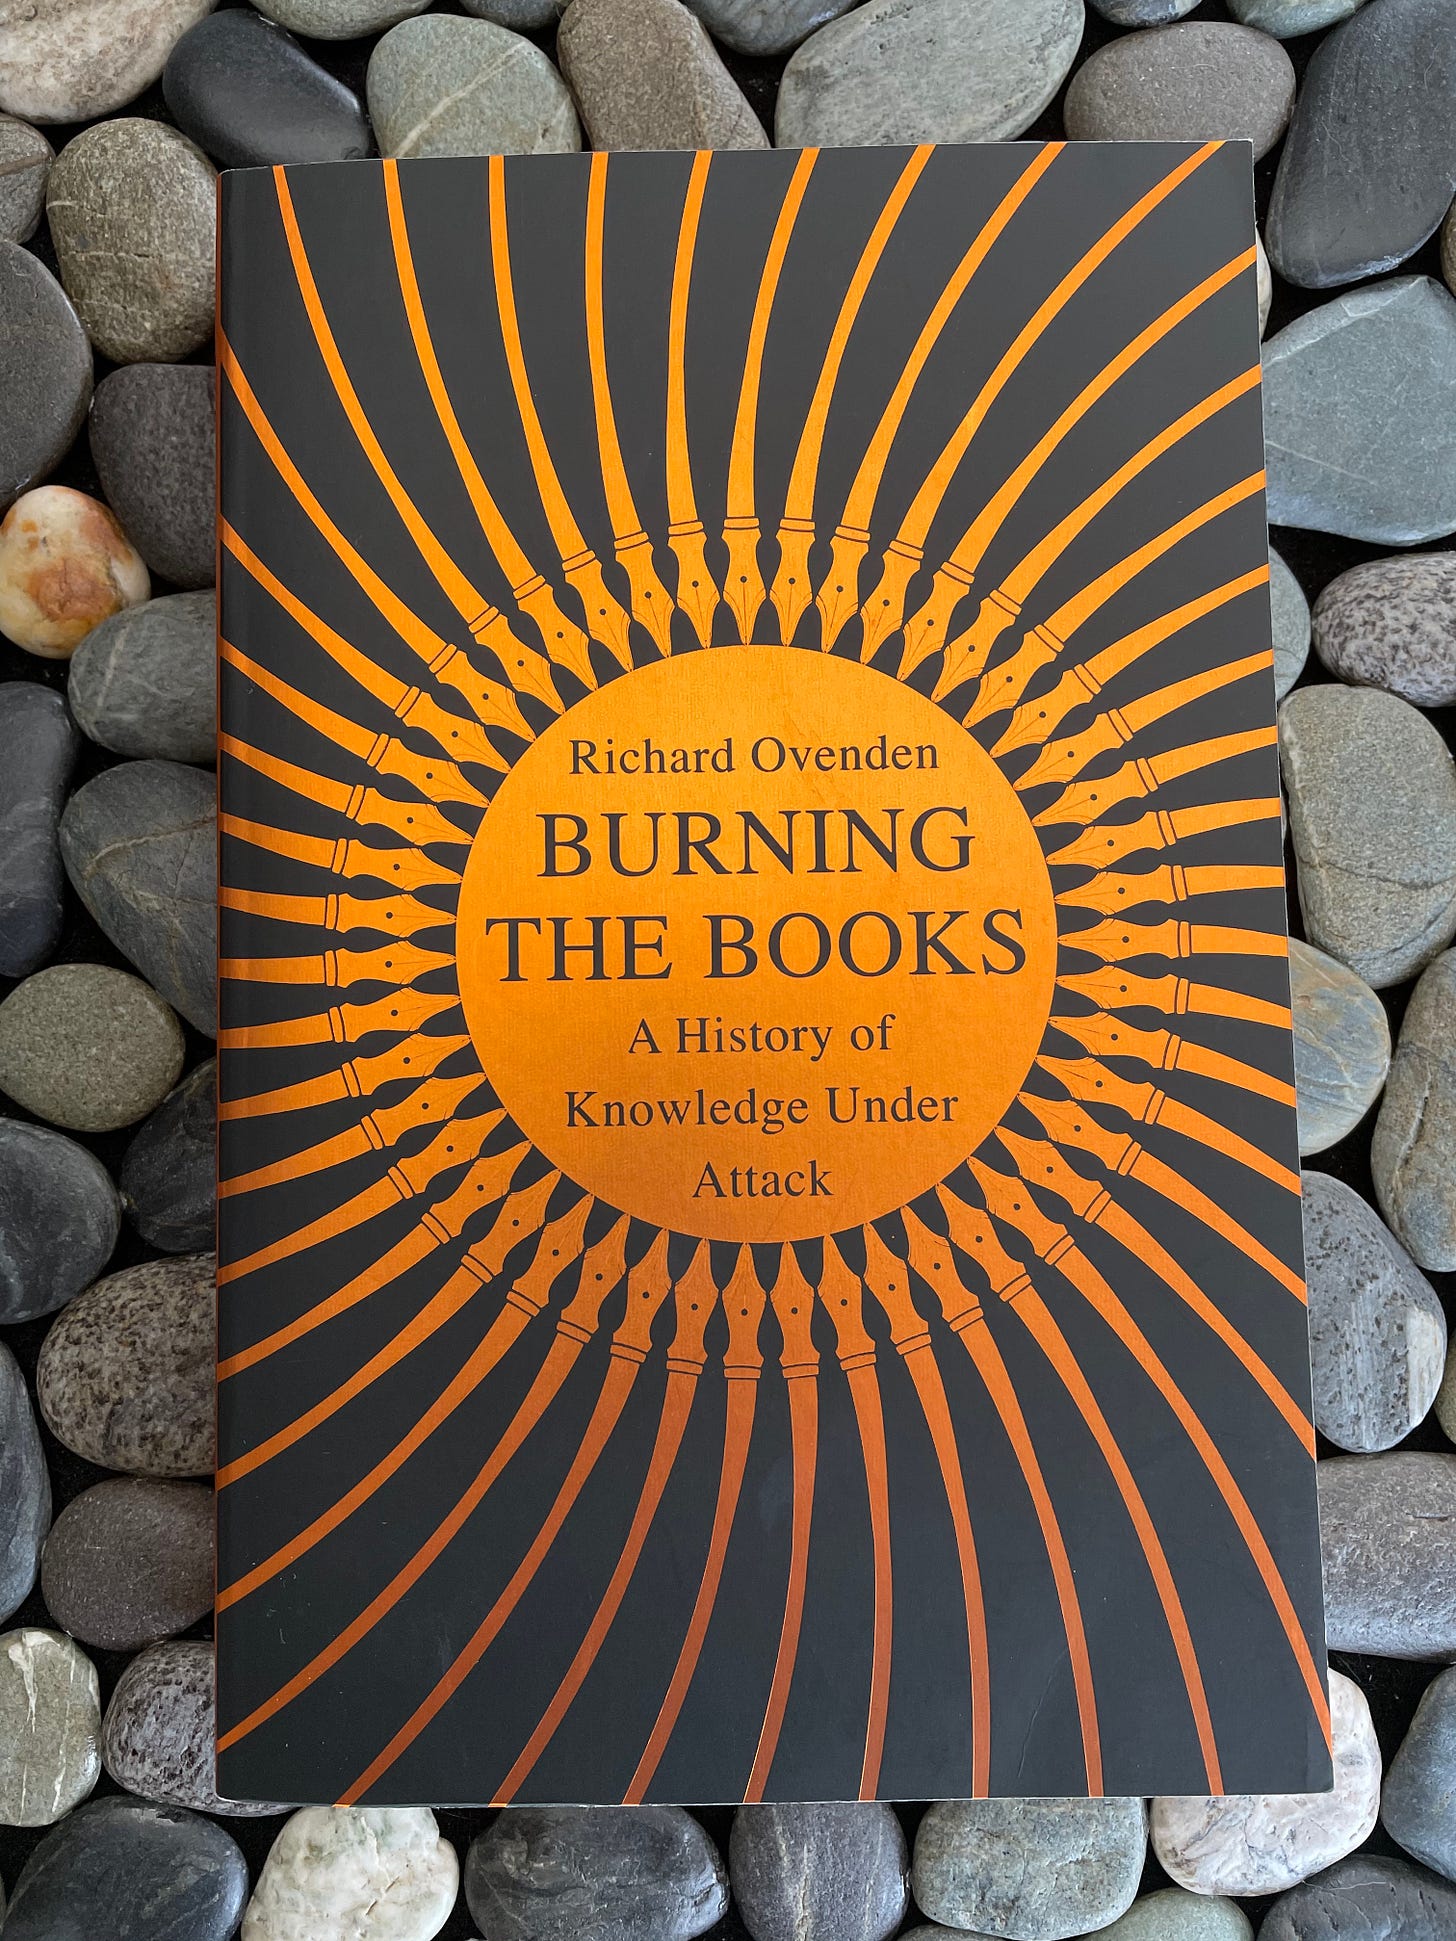 Cover of the Burning the Books: A History of Knowledge Under Attack by Richard Ovenden